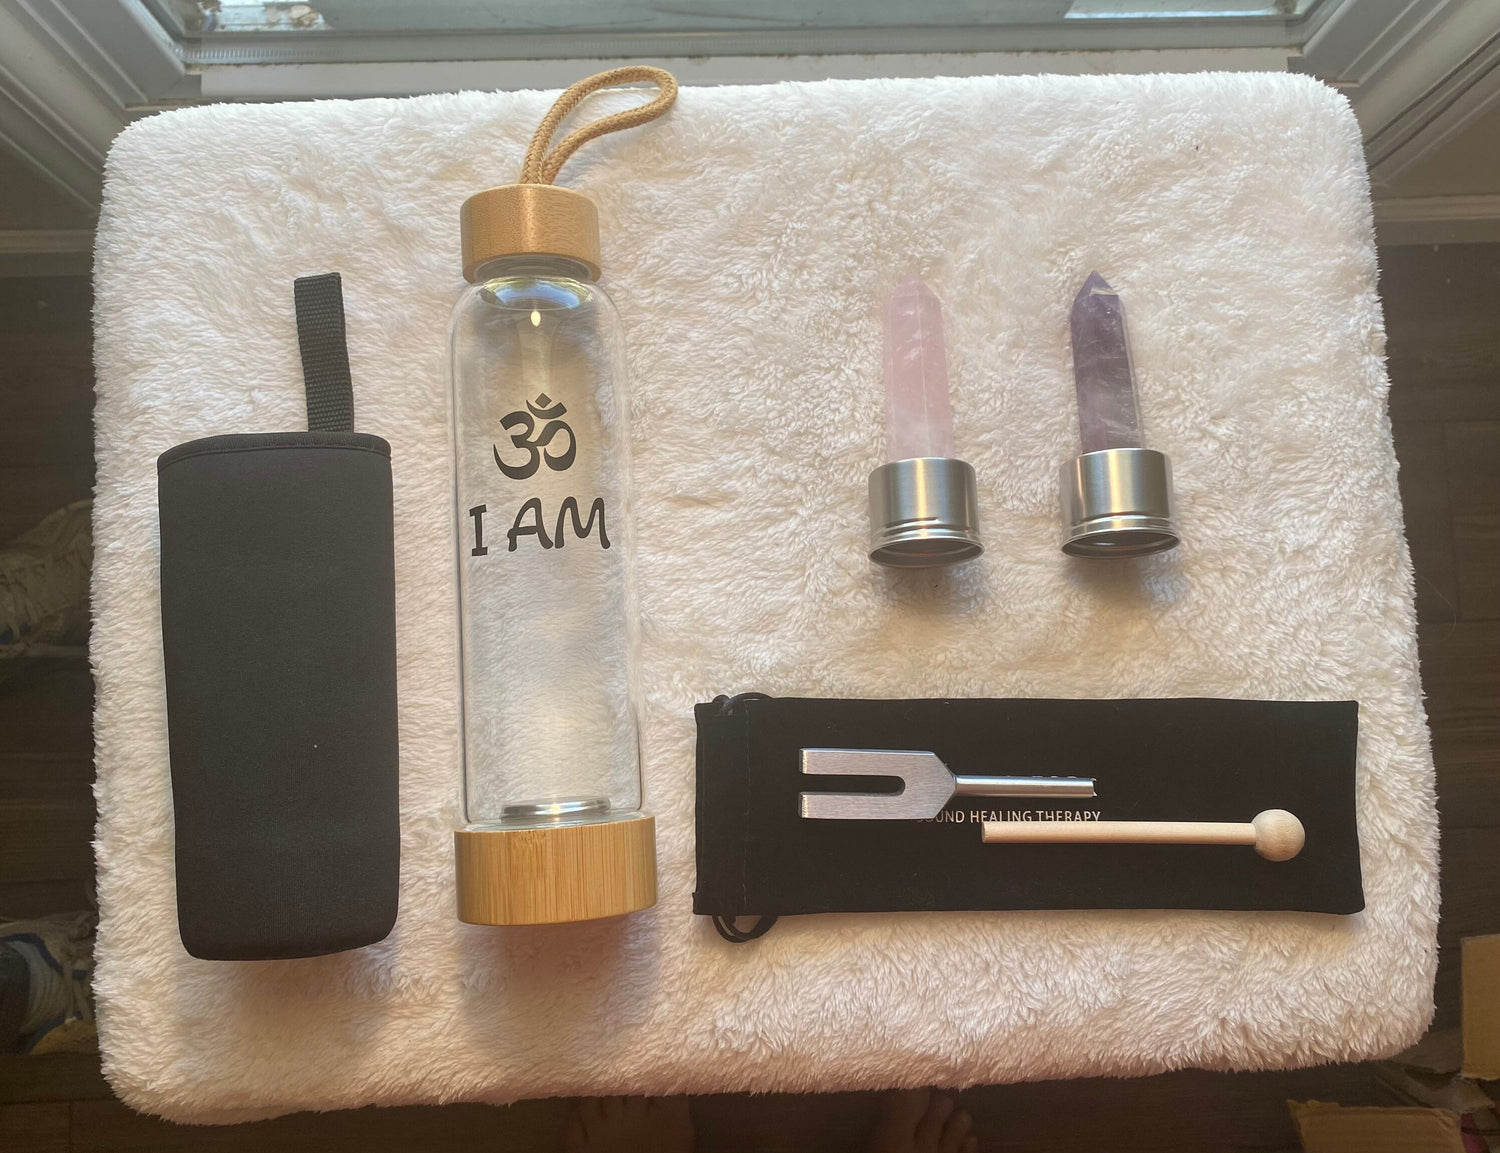 OM - I AM Crystal Infusion Kit - Resonator 4096 Hz Crystal Tuner Vibration Rose Quartz And Amethyst Wand Point Inserts, Glass, Bamboo